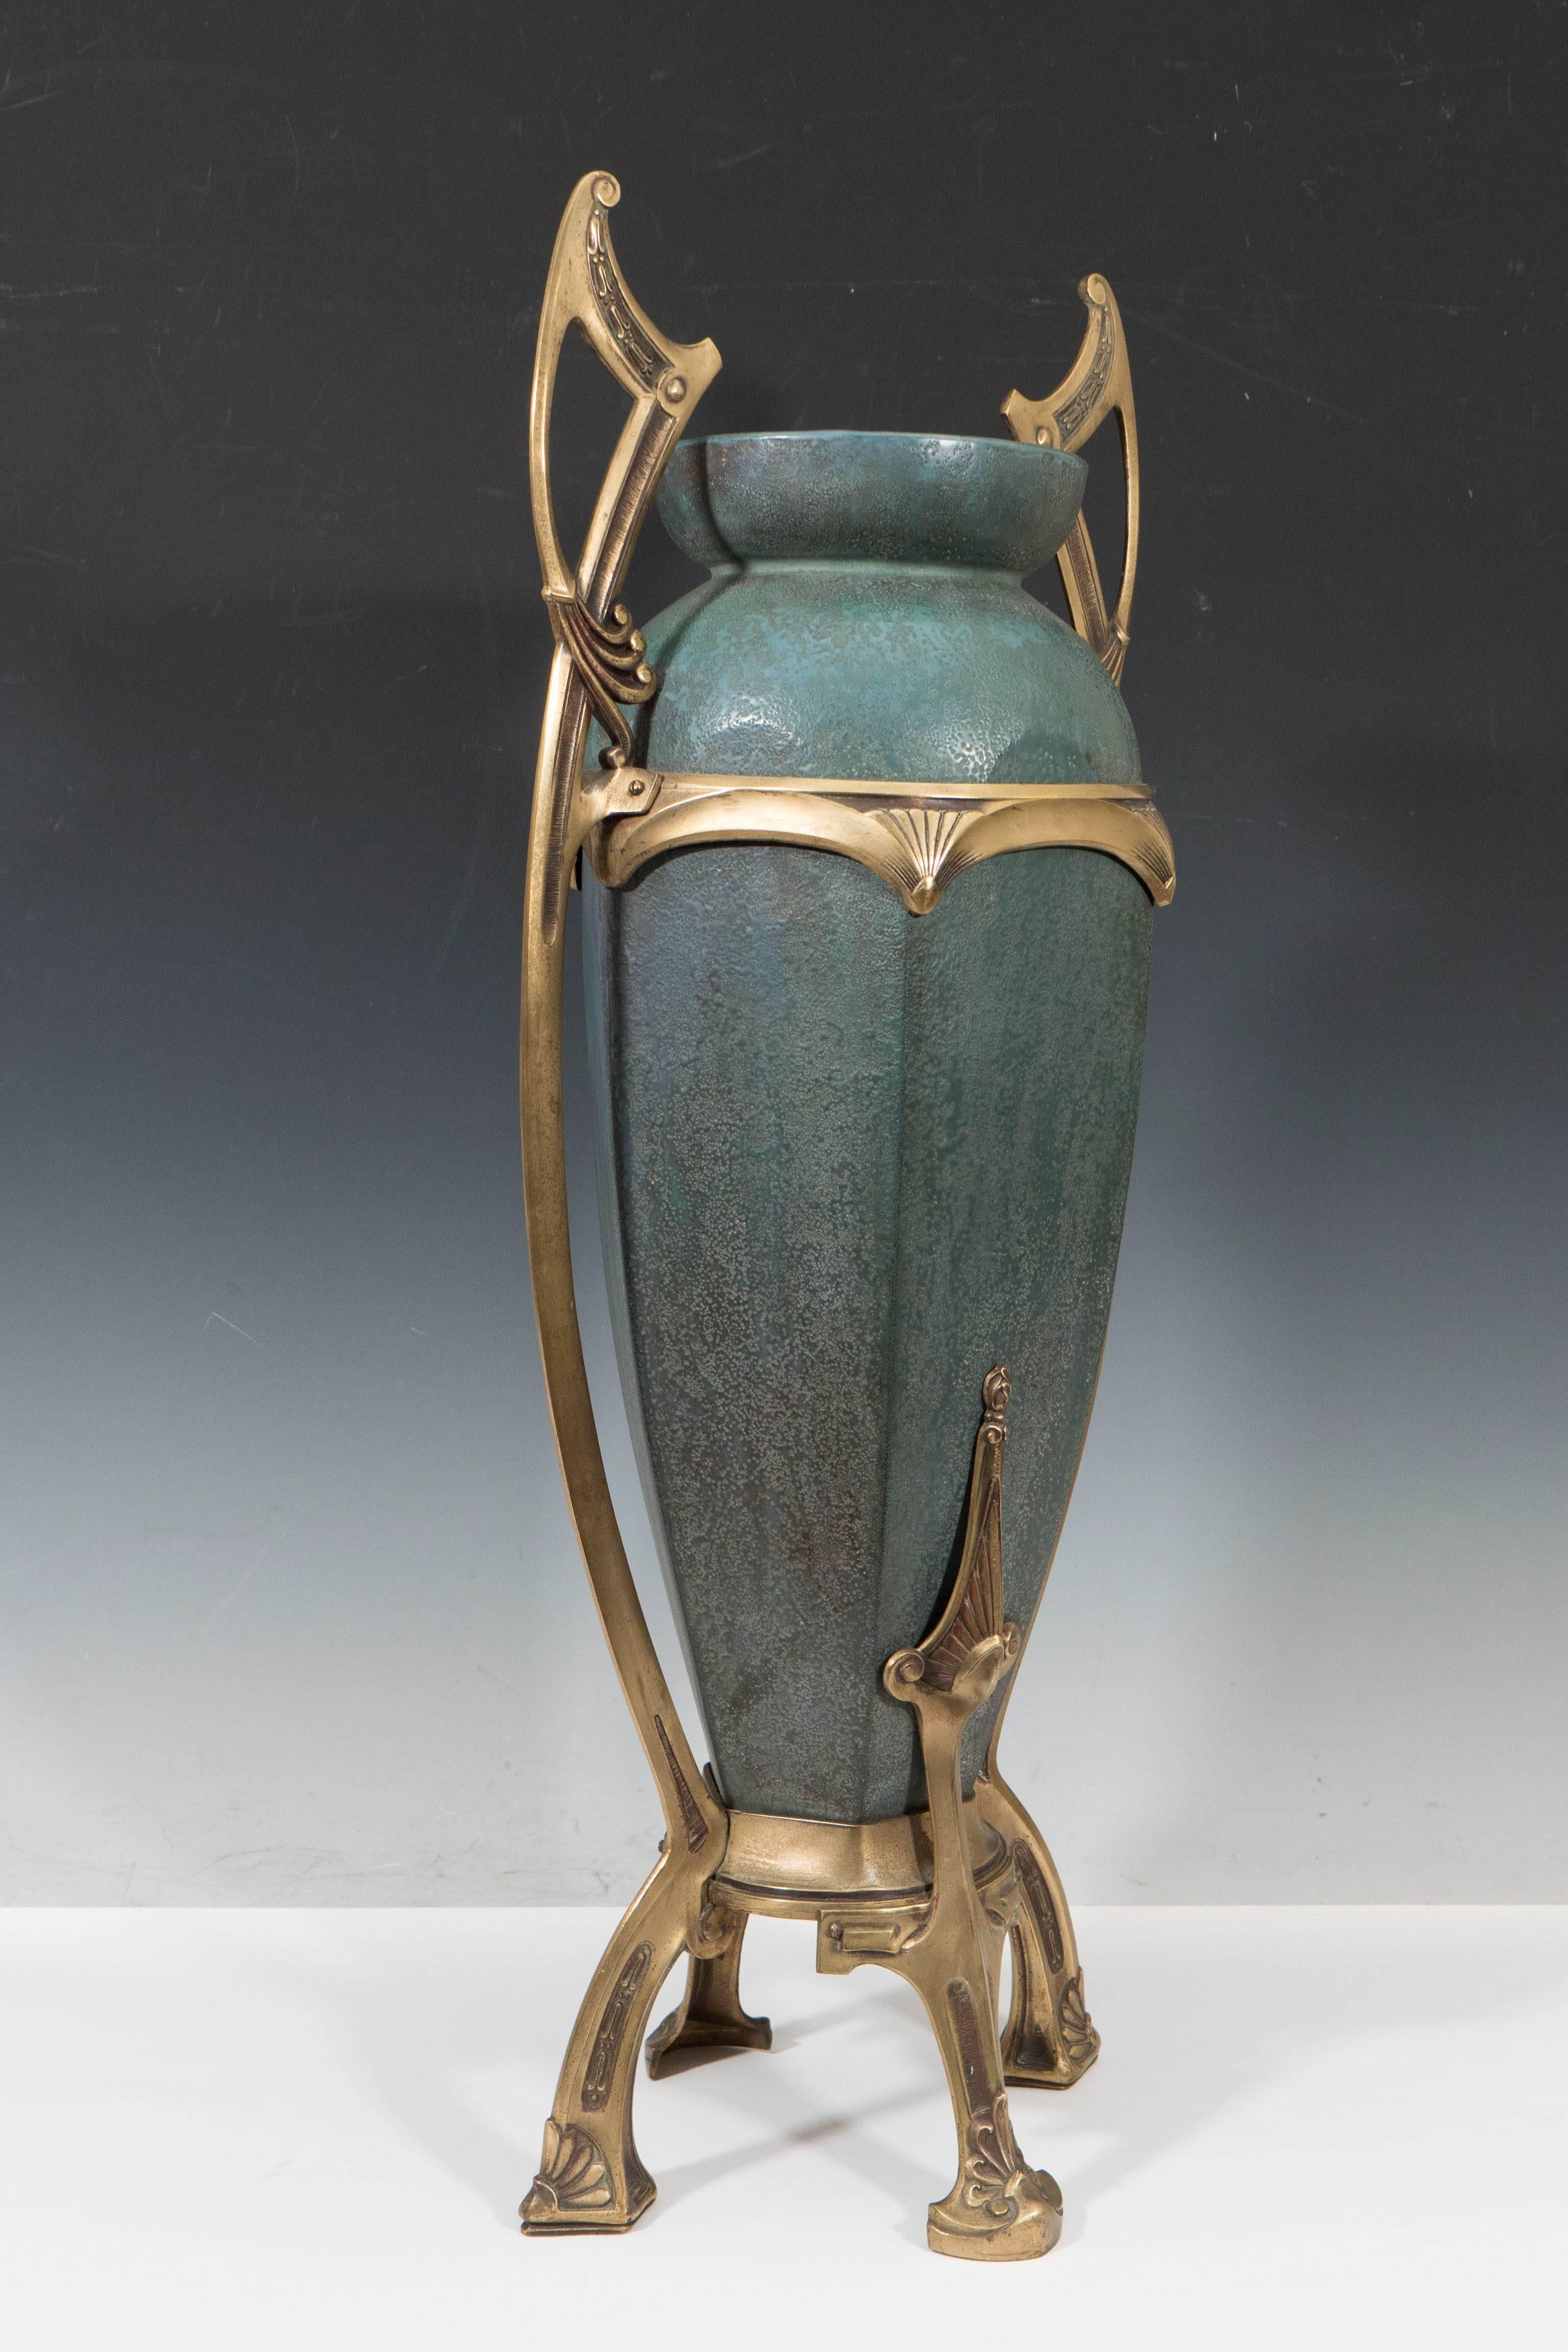 Amphora Early 20th Century Bronze-Mounted Ceramic Vase by Paul Dachsel 3